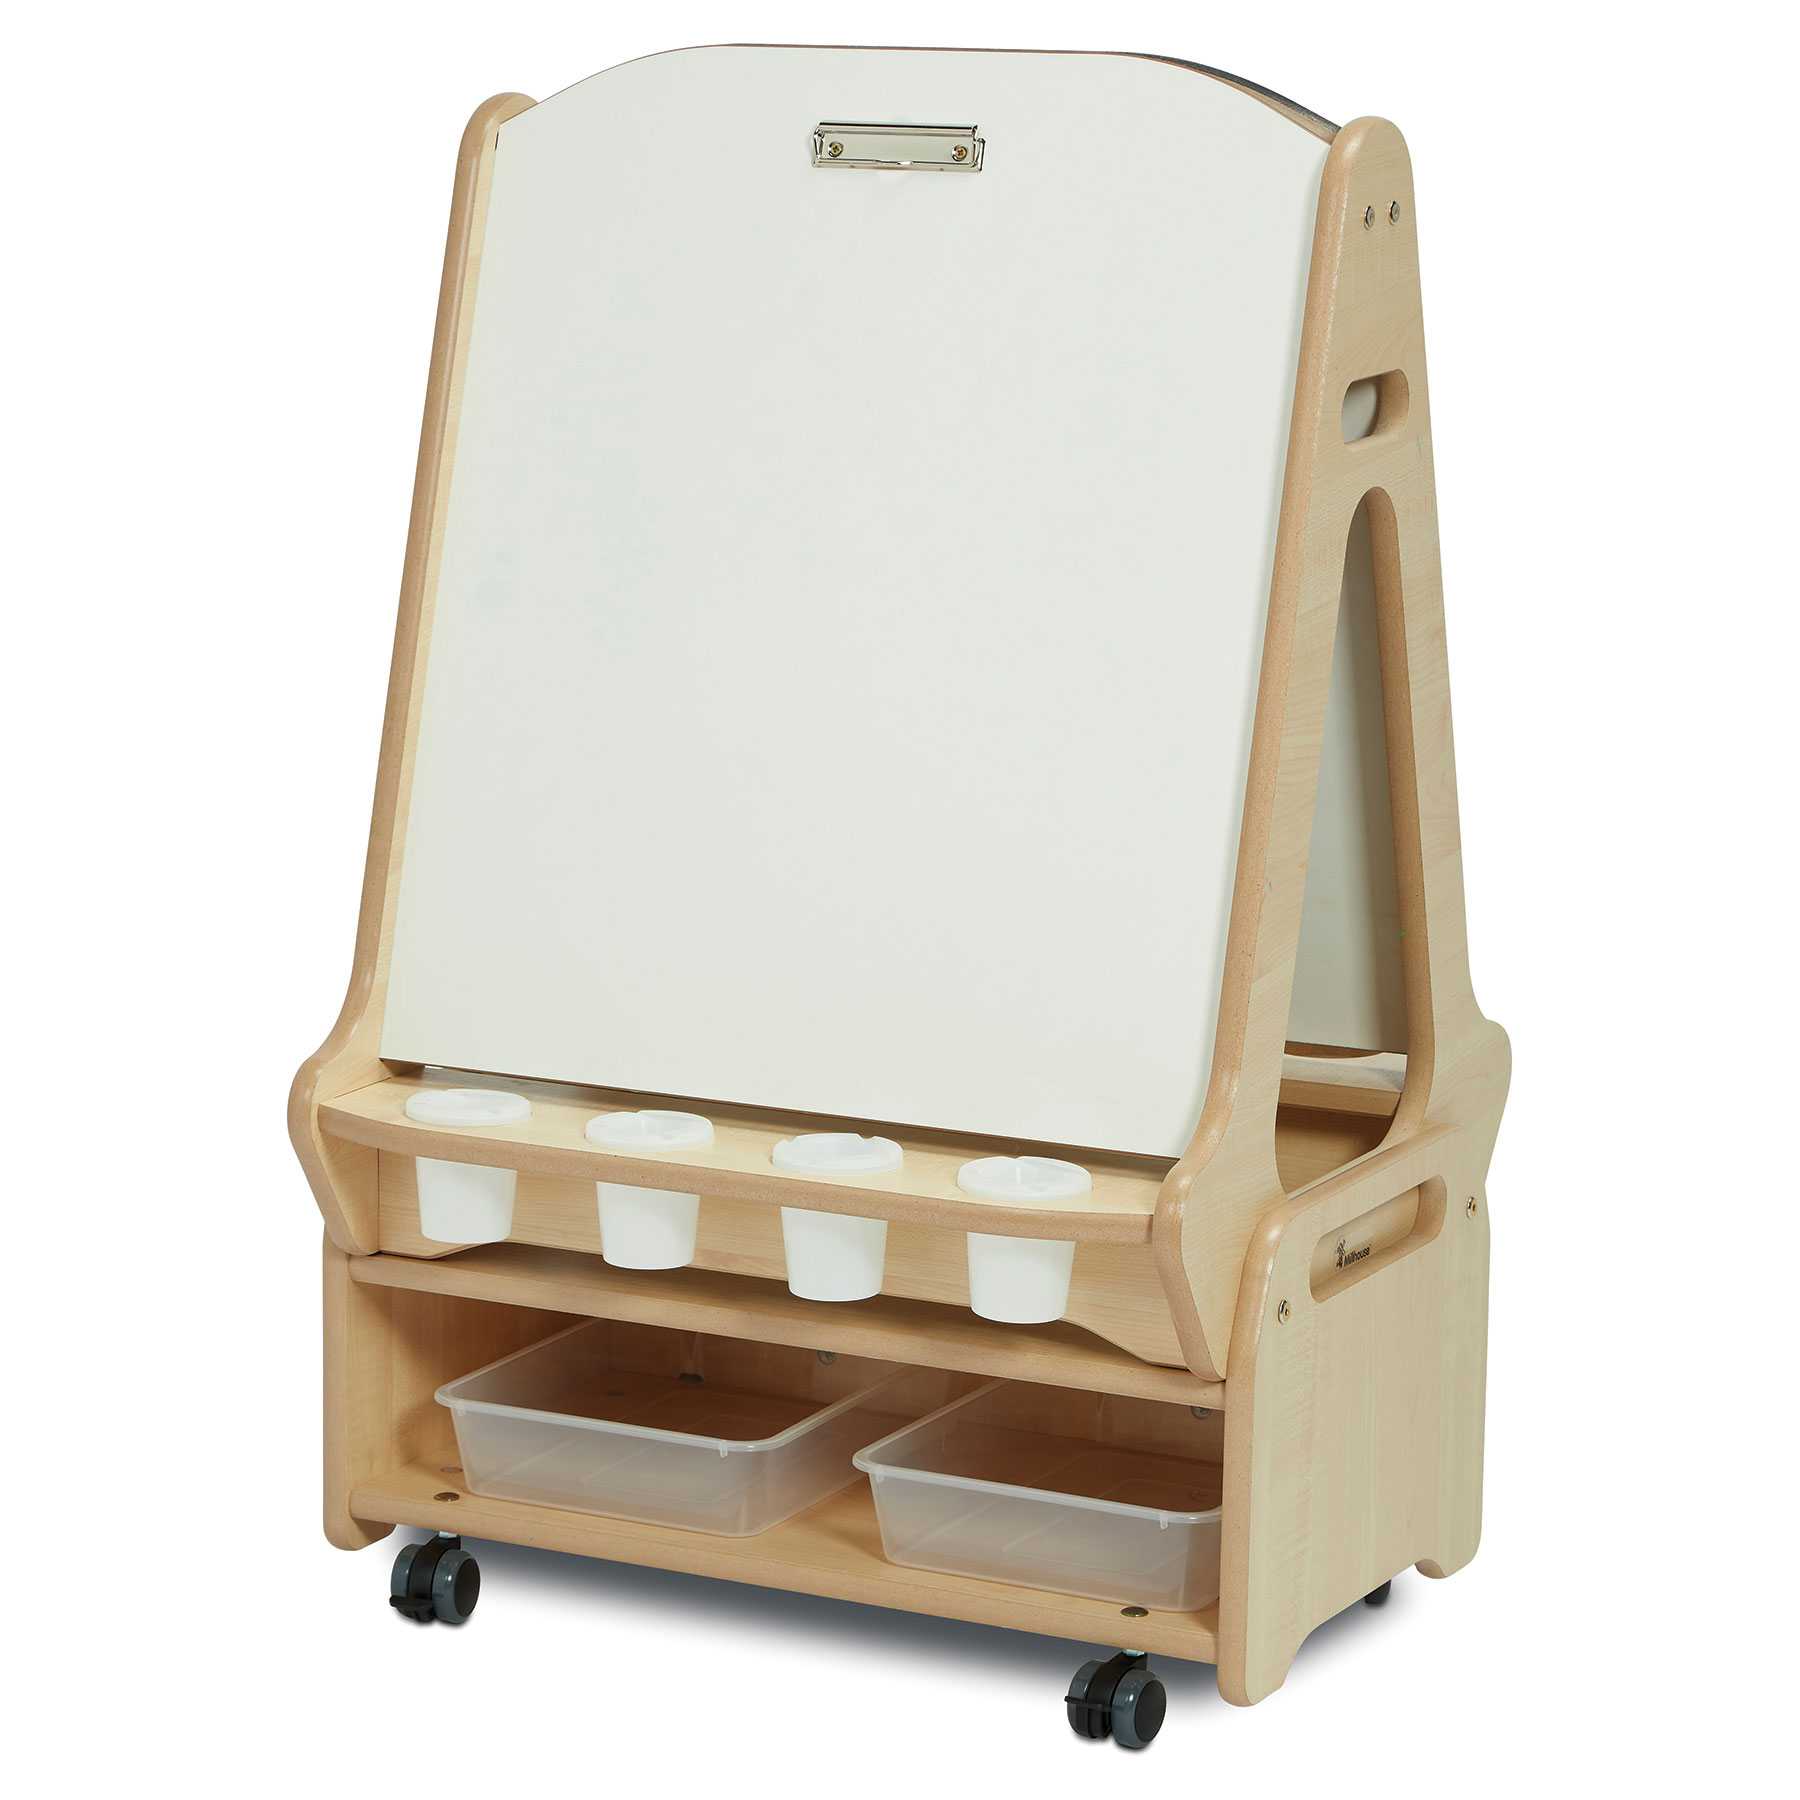 Double-Sided 2 Station White Board Easel with Low Storage Trolley